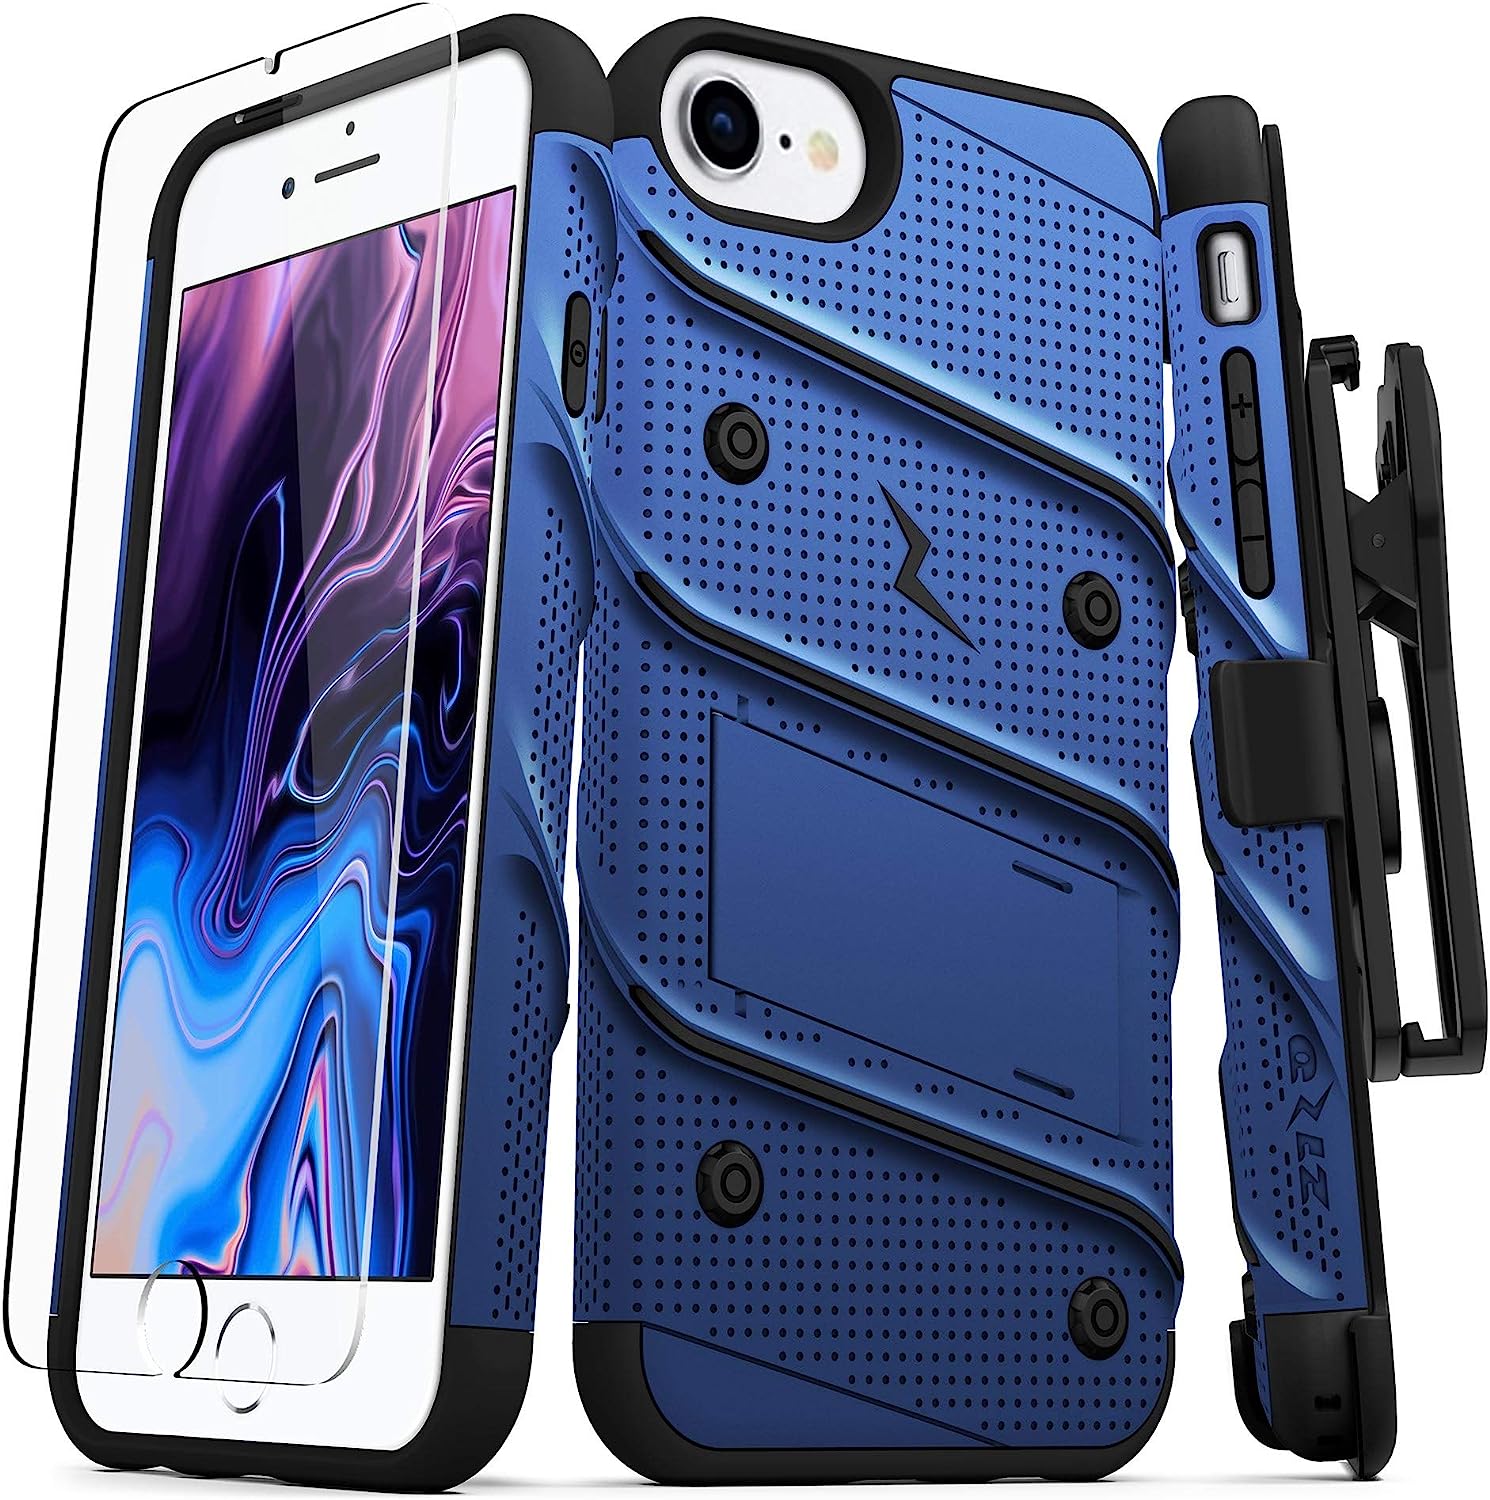 ZIZO Bolt iPhone SE (3rd and 2nd Gen) / 8 / 7 - Holsters Case with Screen Protector, Kickstand & Lanyard (2 Colors)